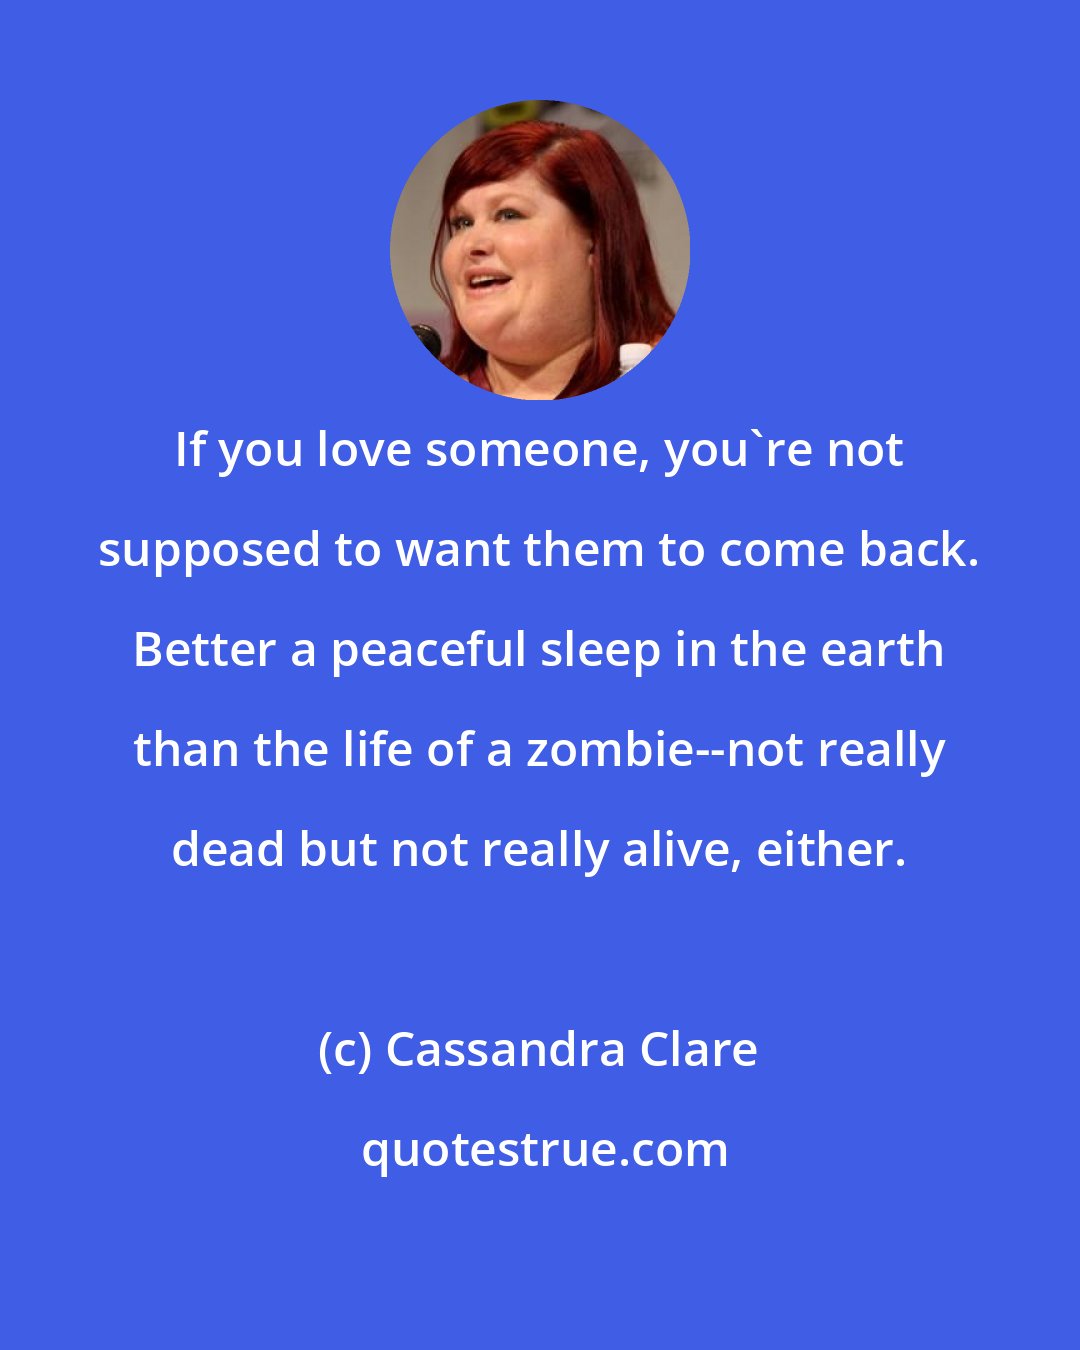 Cassandra Clare: If you love someone, you're not supposed to want them to come back. Better a peaceful sleep in the earth than the life of a zombie--not really dead but not really alive, either.